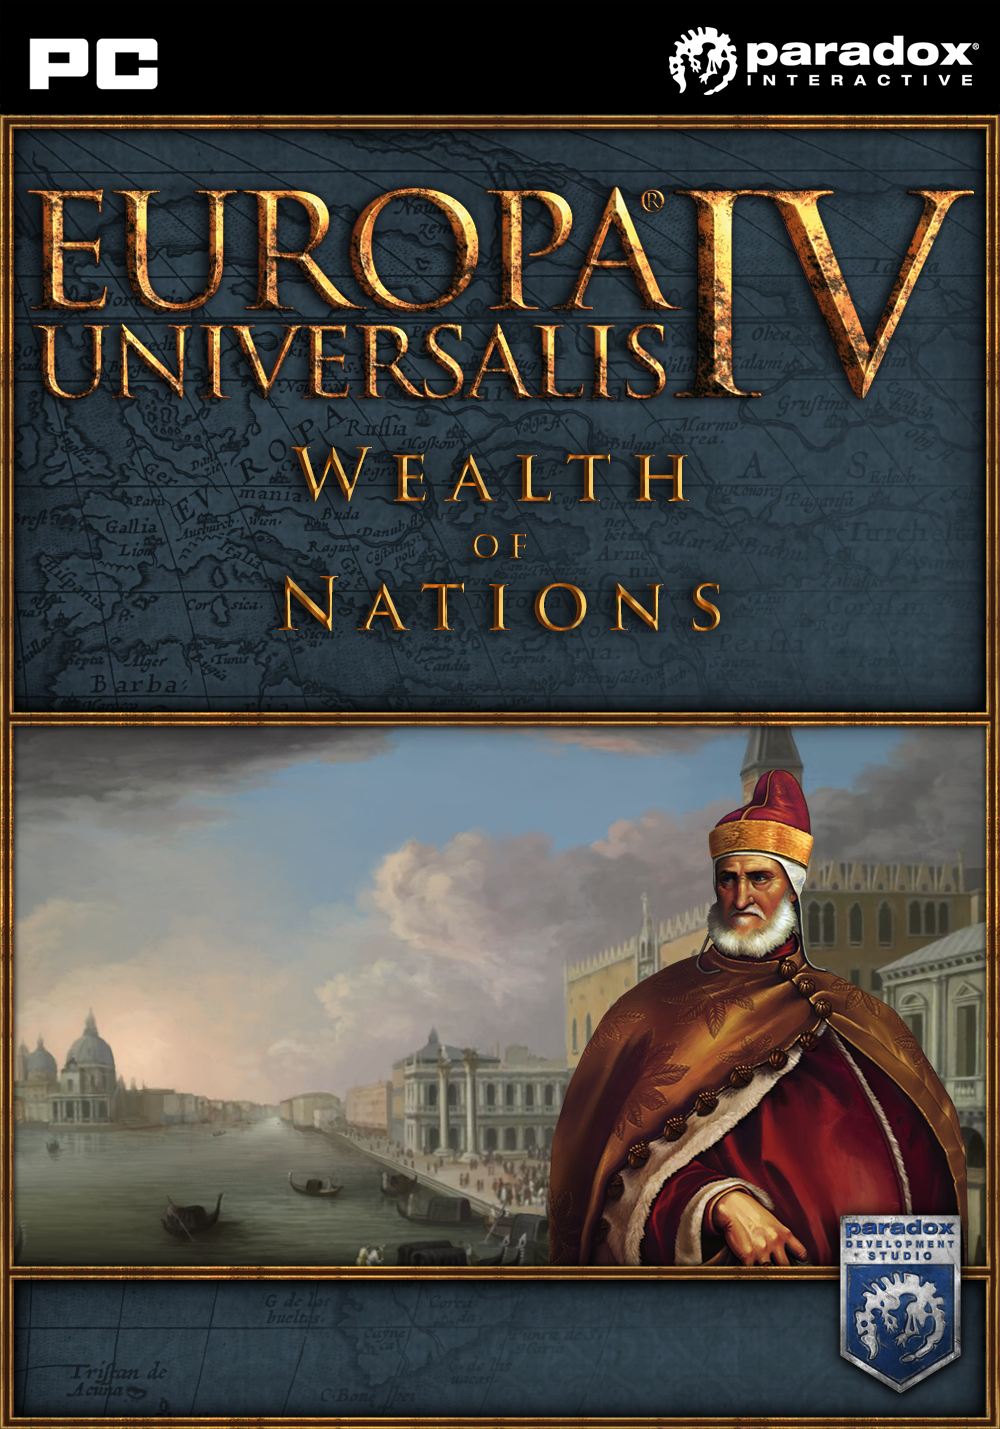 Image of Europa Universalis IV: Wealth of Nations